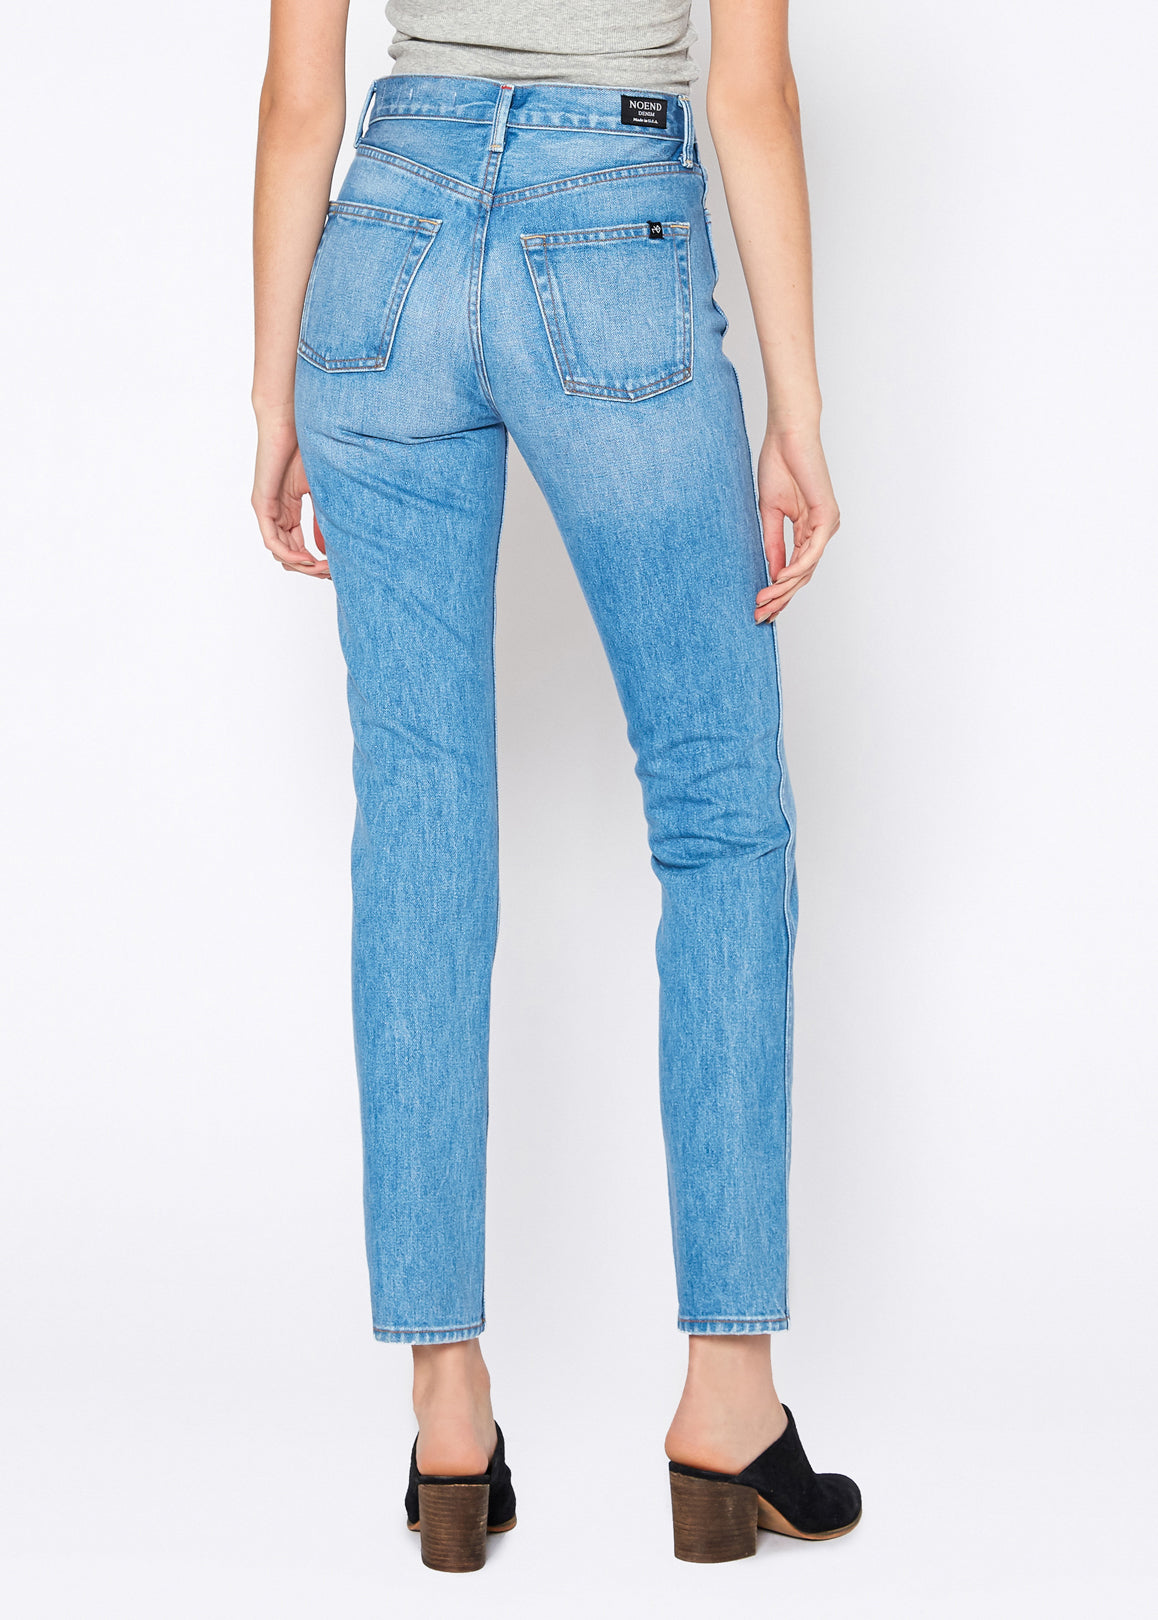 CLAUDE ANKLE HIGH RISE STRAIGHT IN MINERAL - Noend Denim